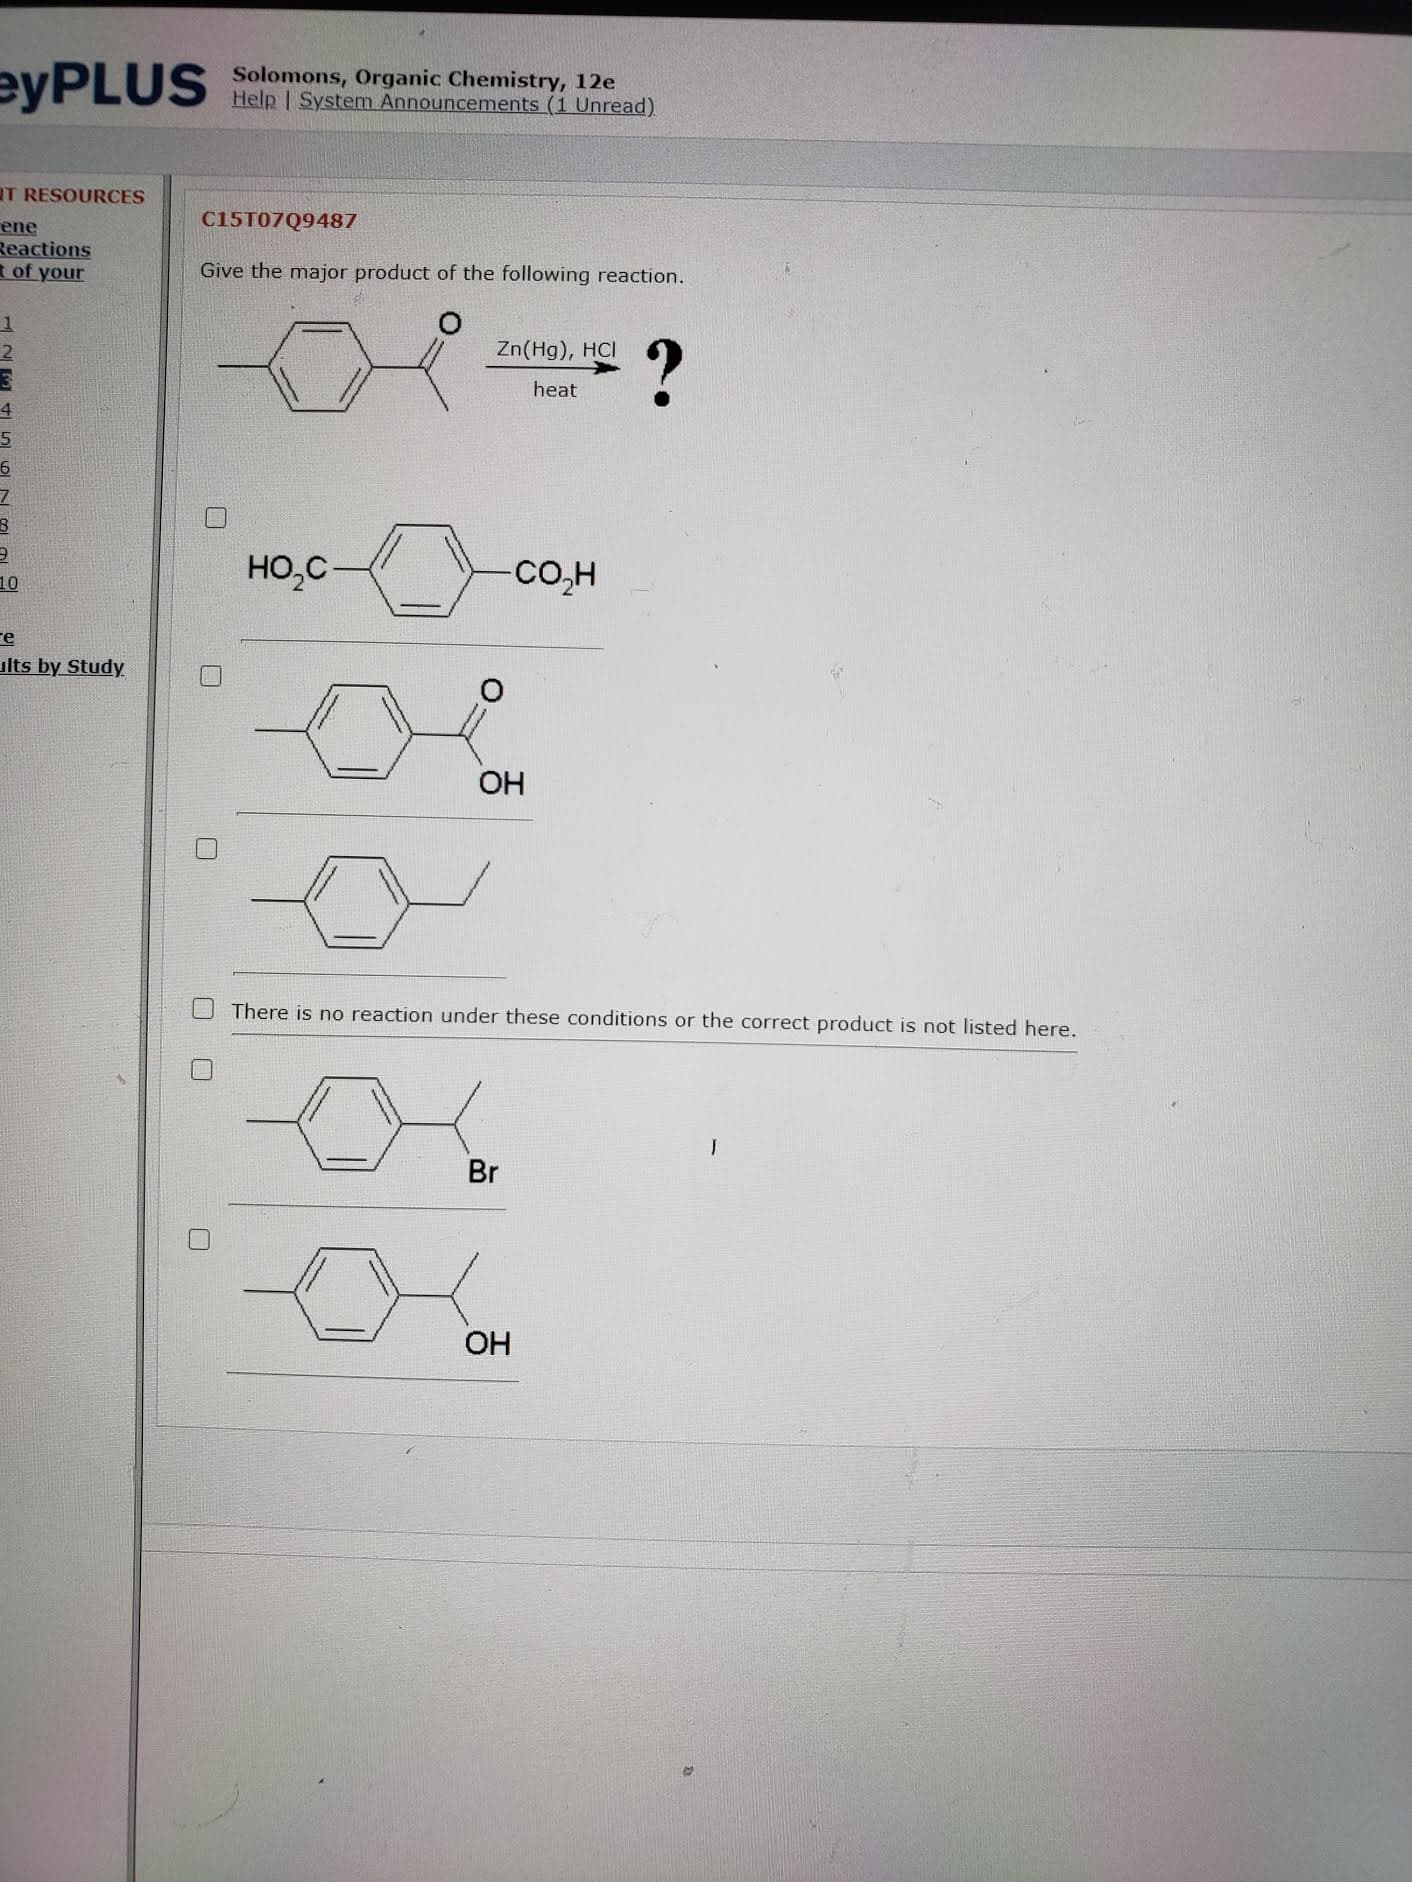 Give the major product of the following reaction.
?
Zn(Hg), HCI
heat
HO,C-
CO.H
OH
J There is no reaction under these conditions or the correct product is not listed here.
Br
OH
